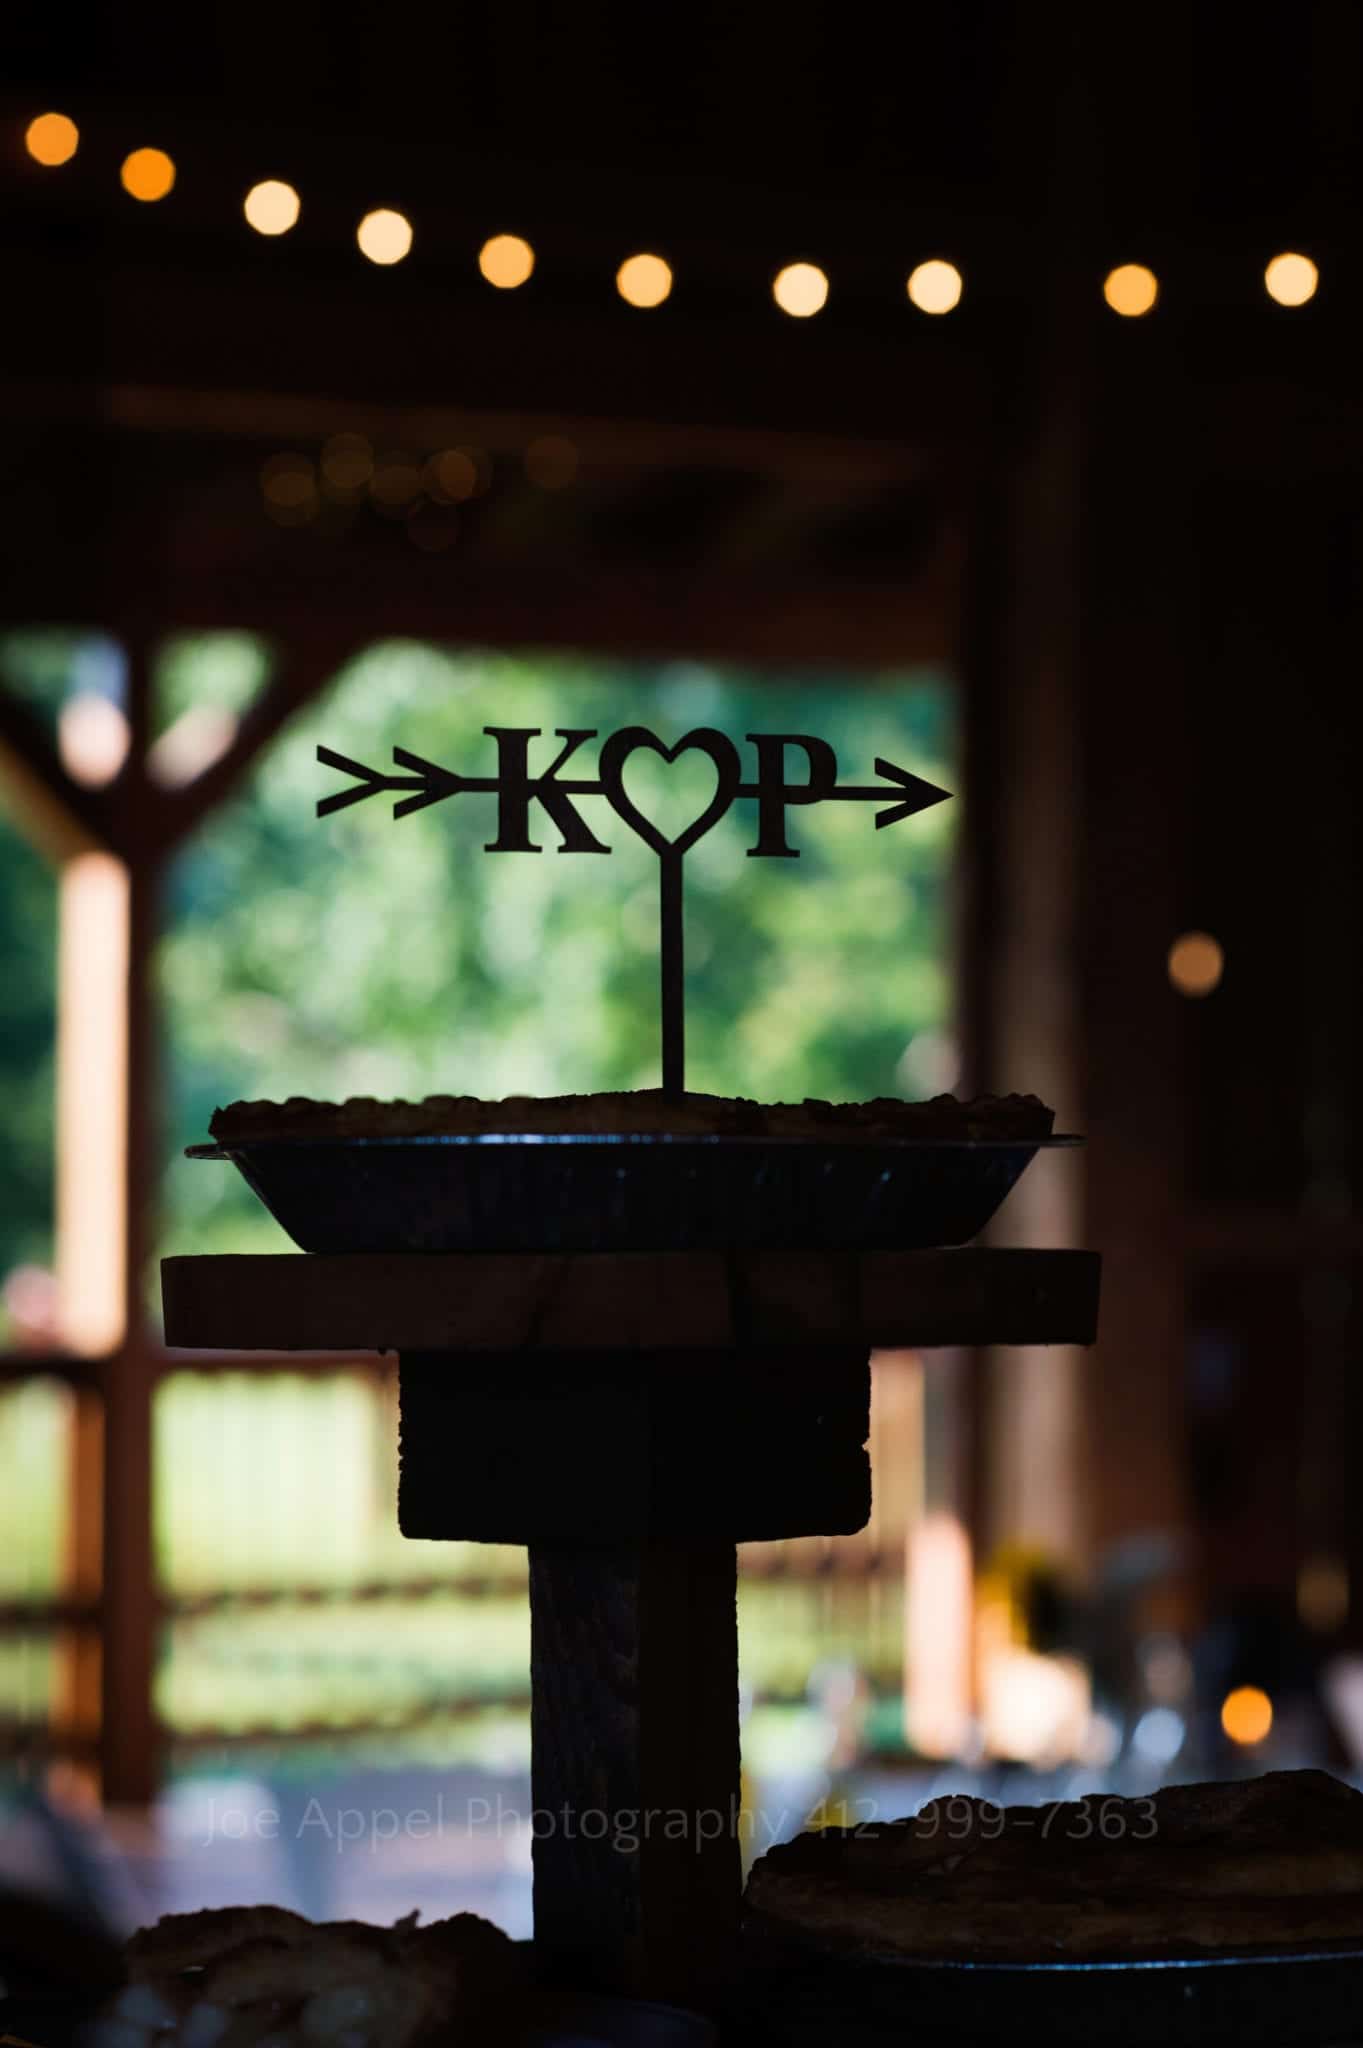 The letters K and P with a heart between them and an arrow through all of it is a topper on a pie seen in silhouette. Armstrong Farms Weddings